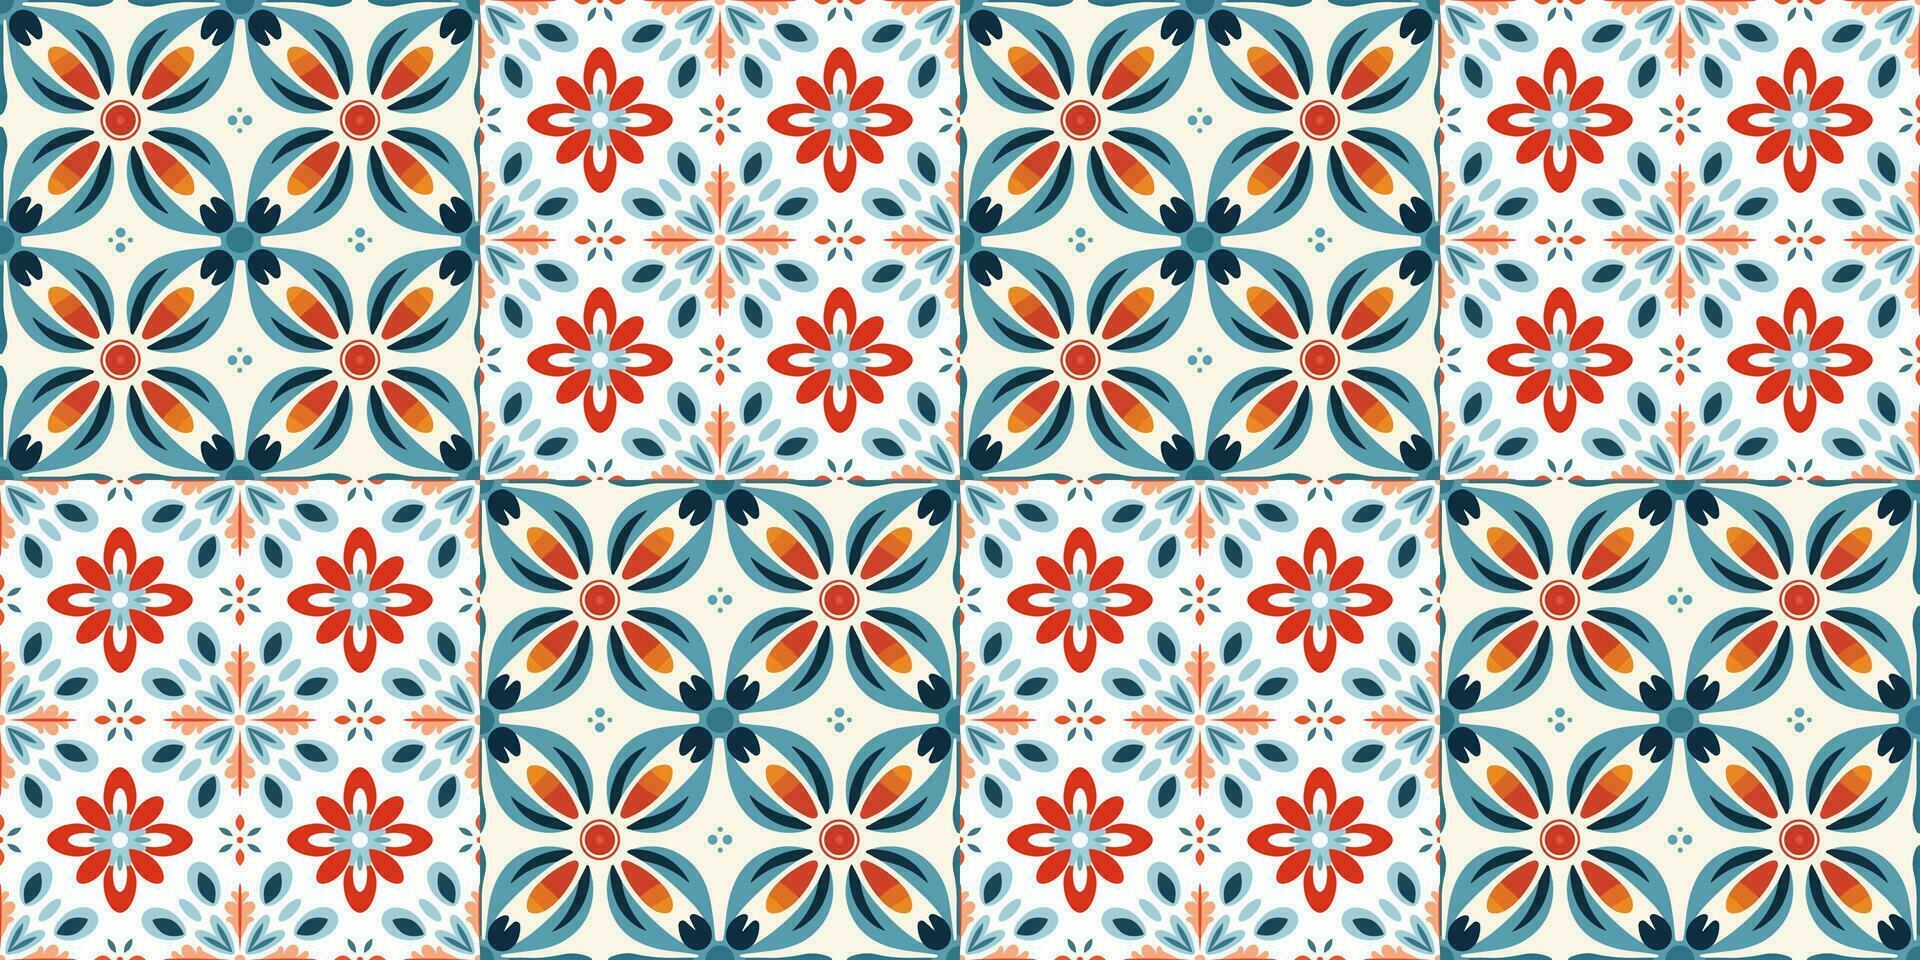 Scandinavian Style Tile in blue and red colors. Ethnic Vector Seamless Floral Pattern. Abstract Square Geometric Swatch for Wrapping Paper, Indoor Decor, or Fabric